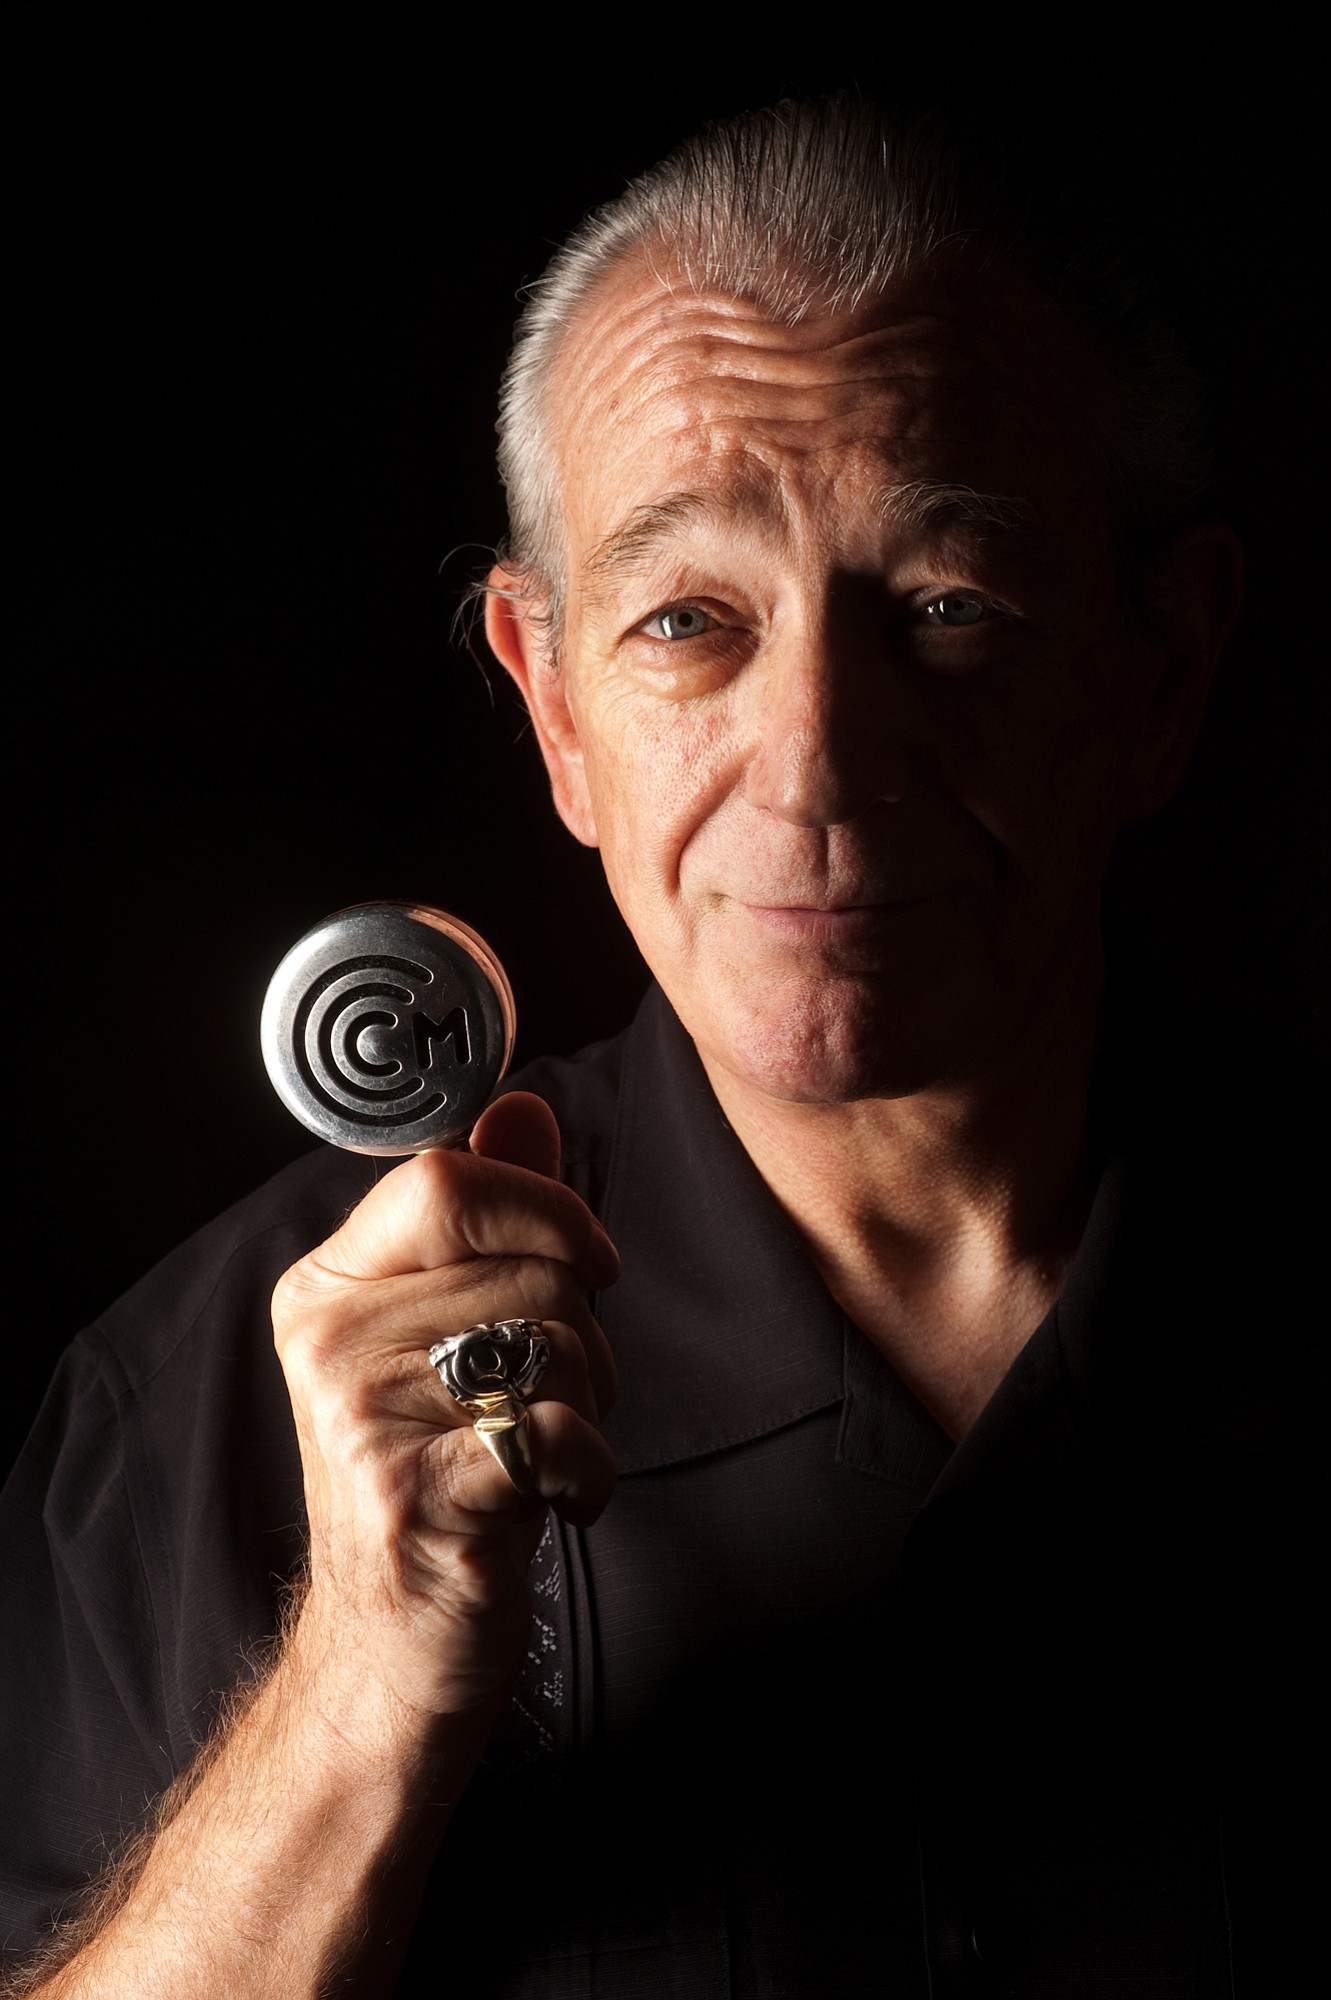 American electric blues harmonica player Charlie Musselwhite will perform April 2 at the Aladdin Theater in Portland.